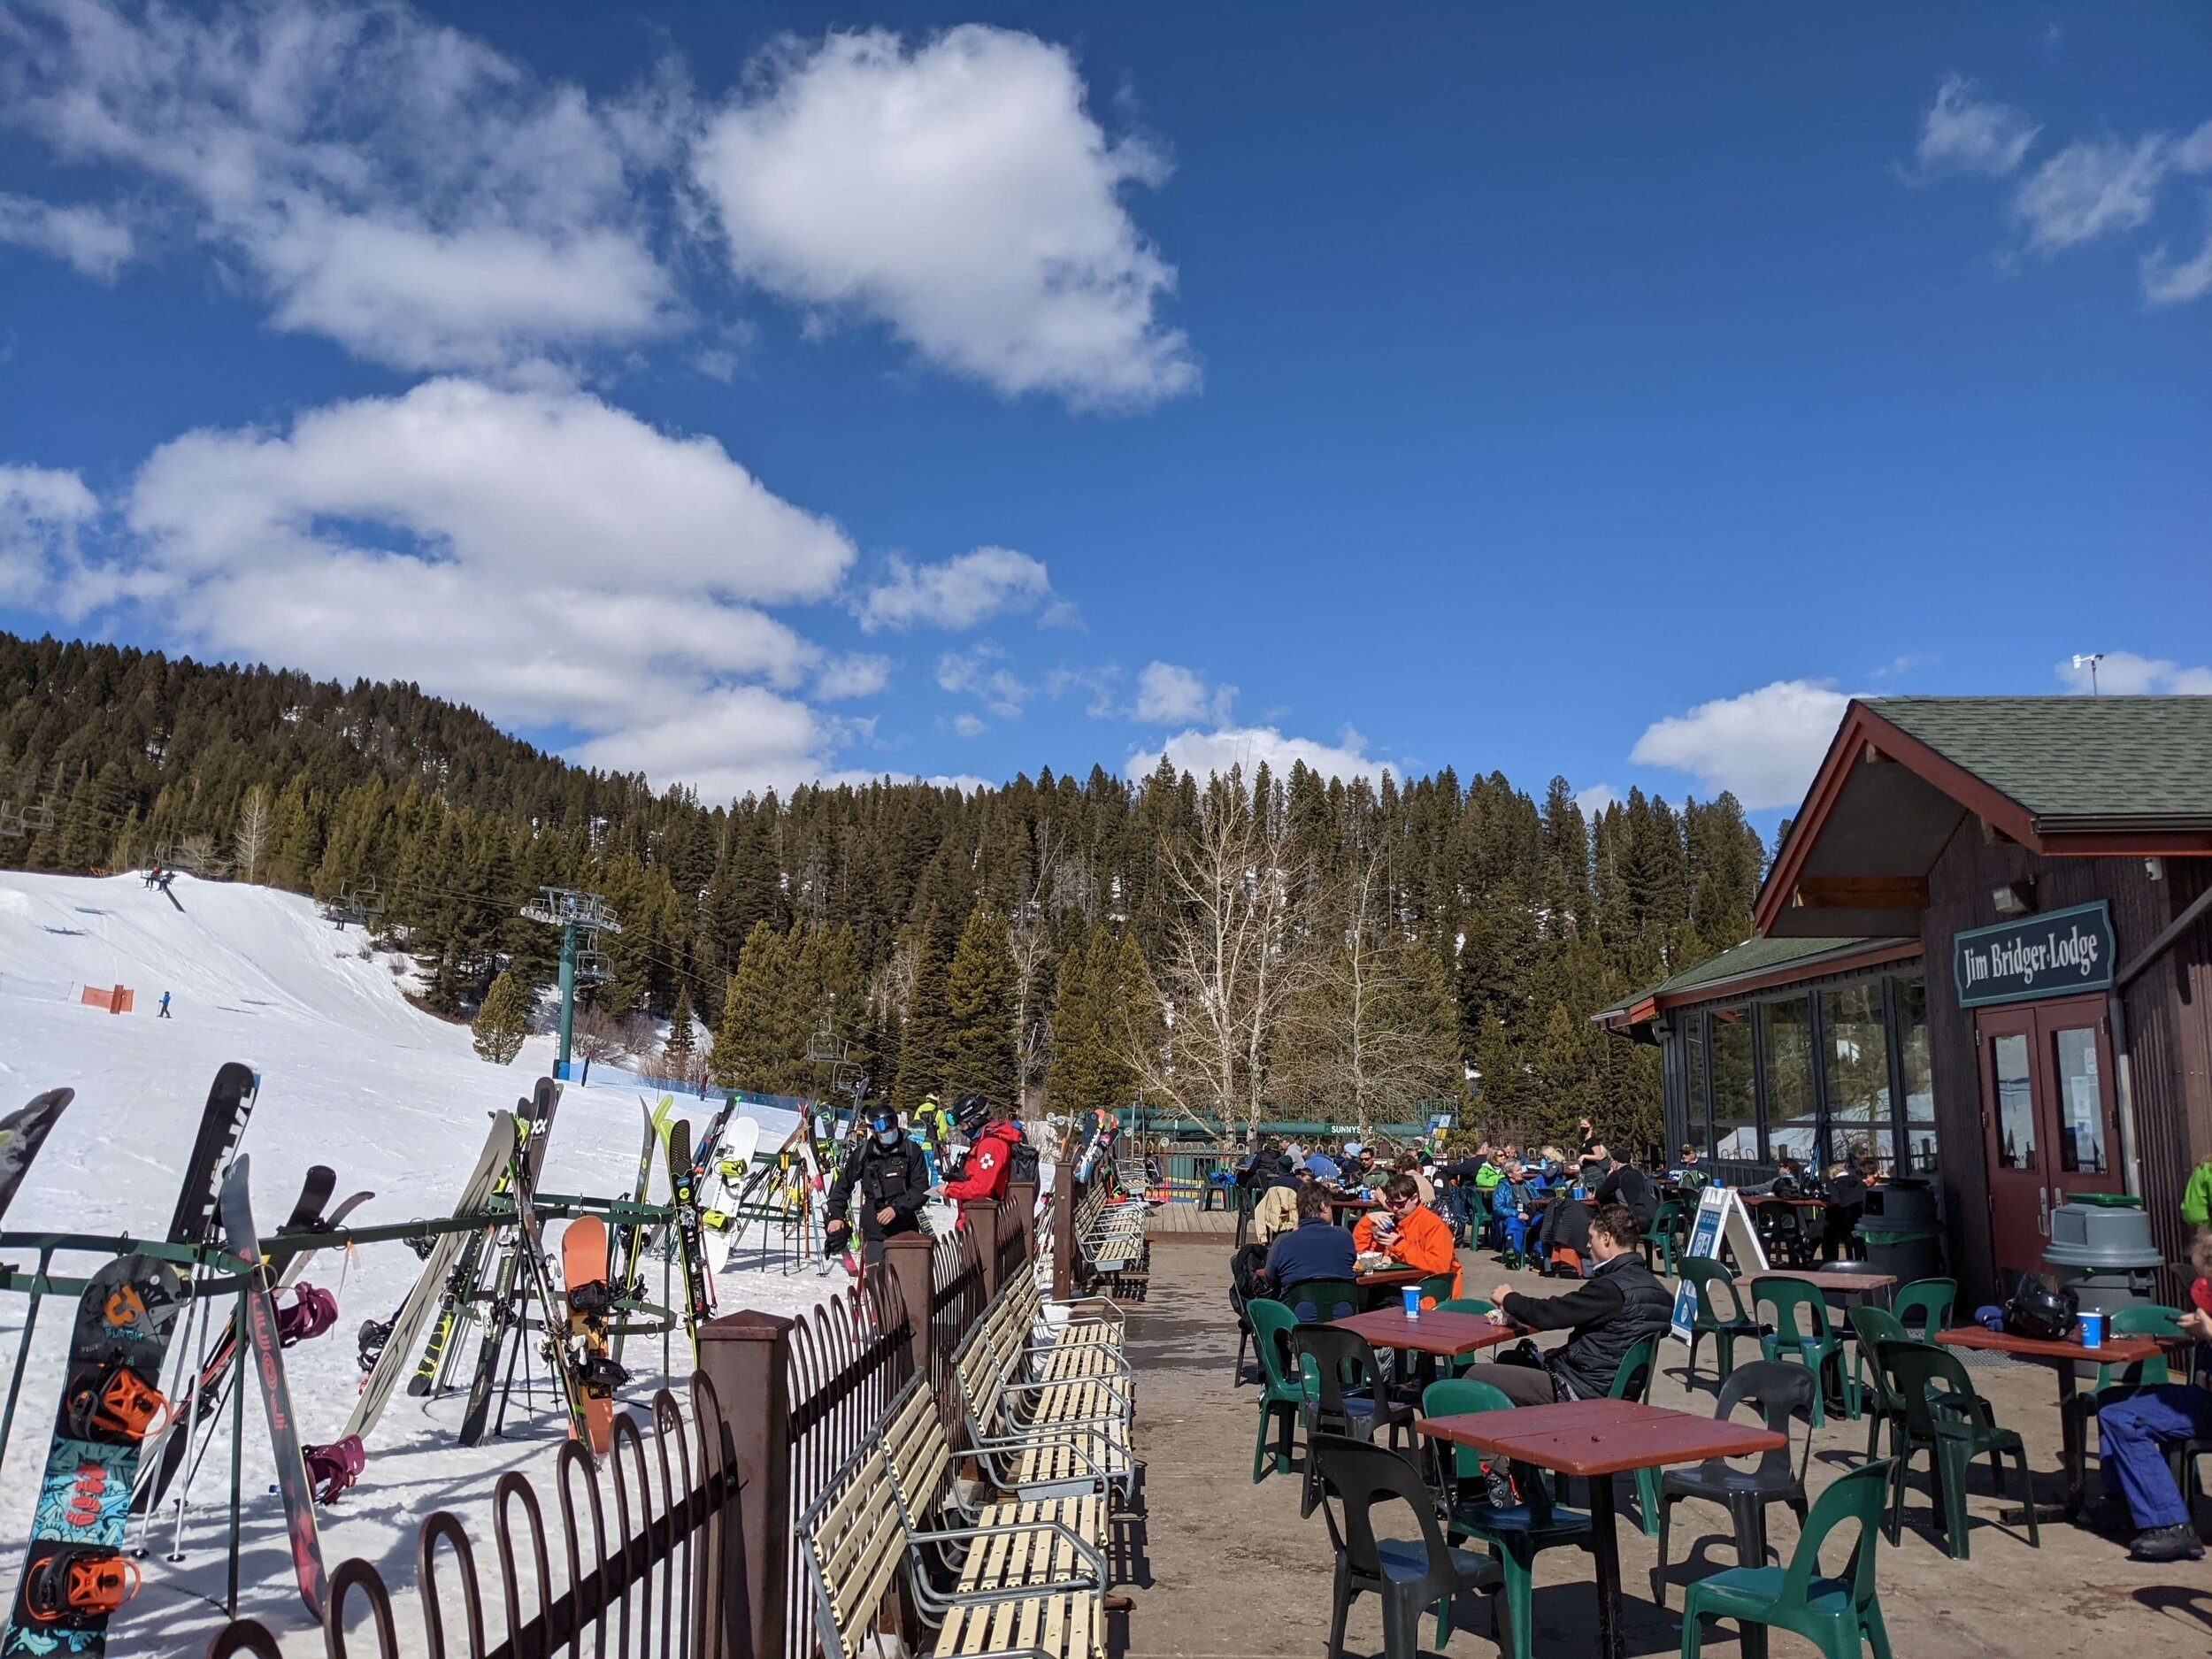  One of the half pipes is right outside Jim Bridger Lodge and watching people do awesome tricks makes for an entertaining lunch. (Occasionally they wipe out too which is also entertaining. And scary as a parent.) 